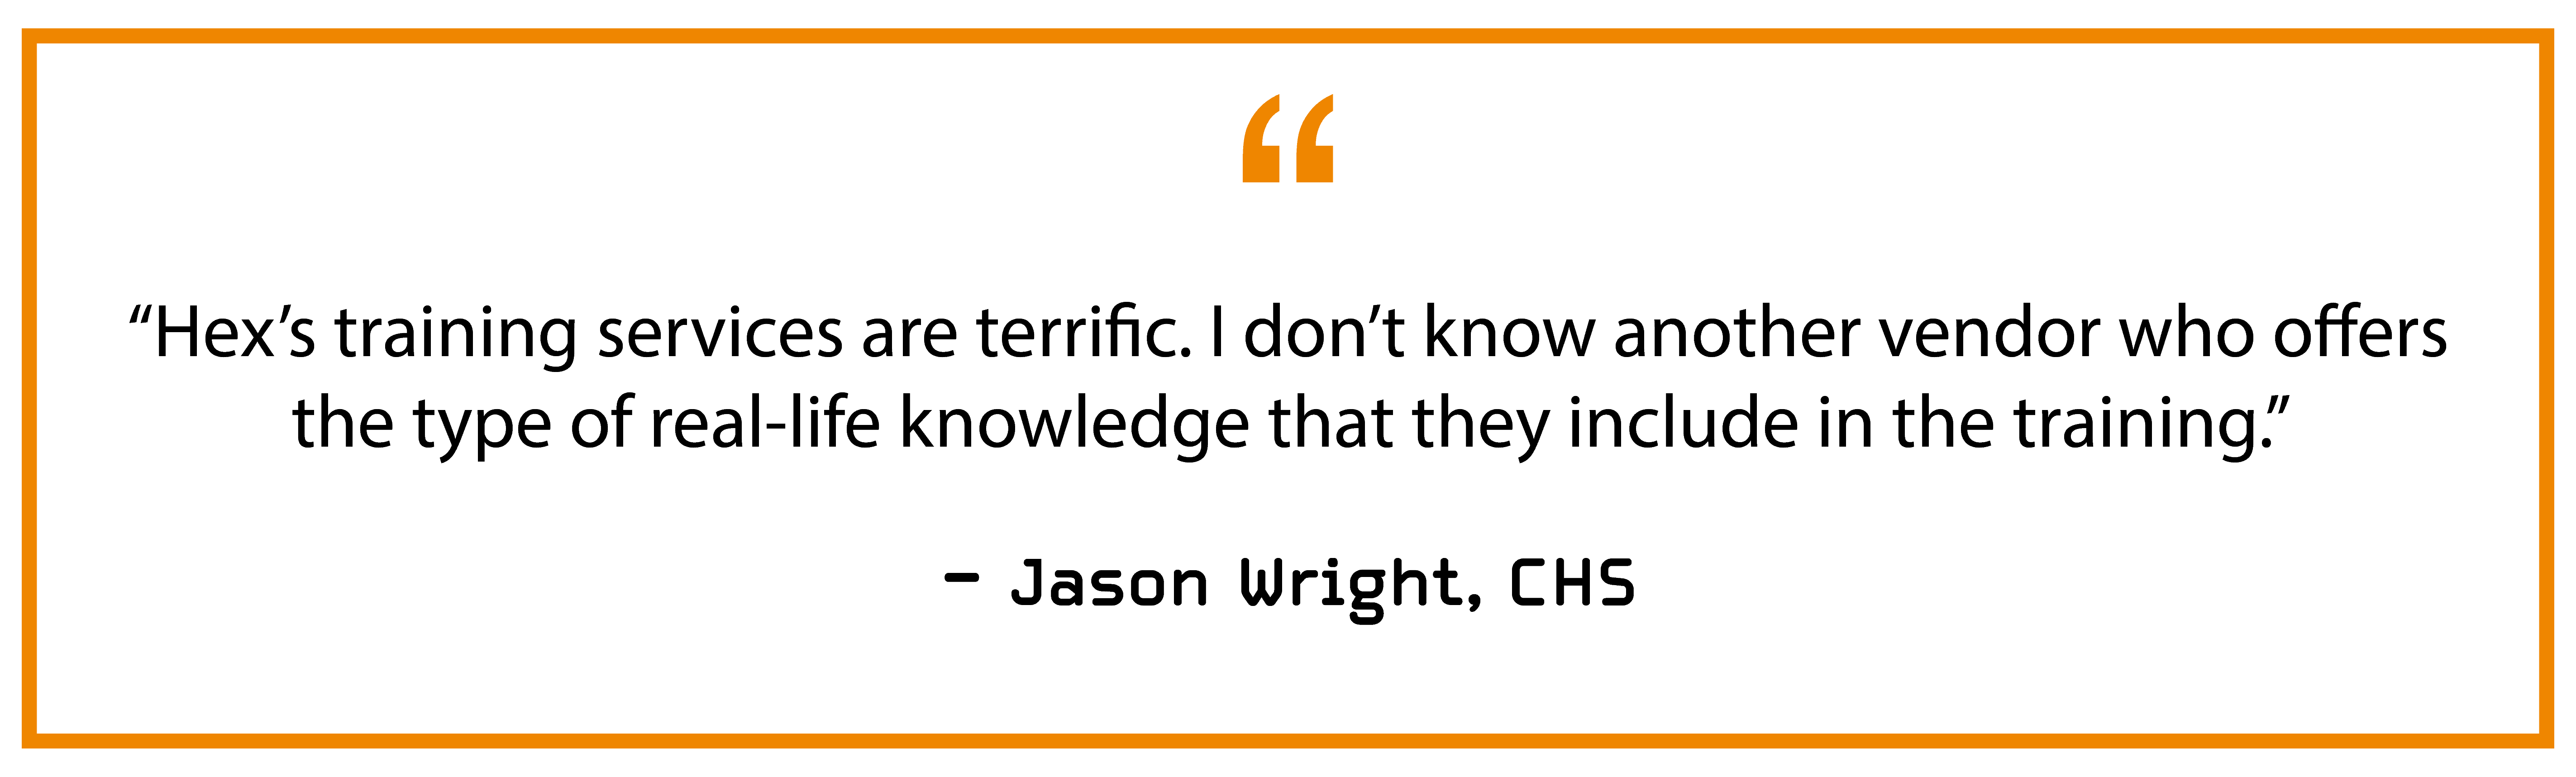 “Hex’s training services are terrific. I don’t know another vendor who offers the type of real-life knowledge that they include in the training.” — Jason Wright, CHS